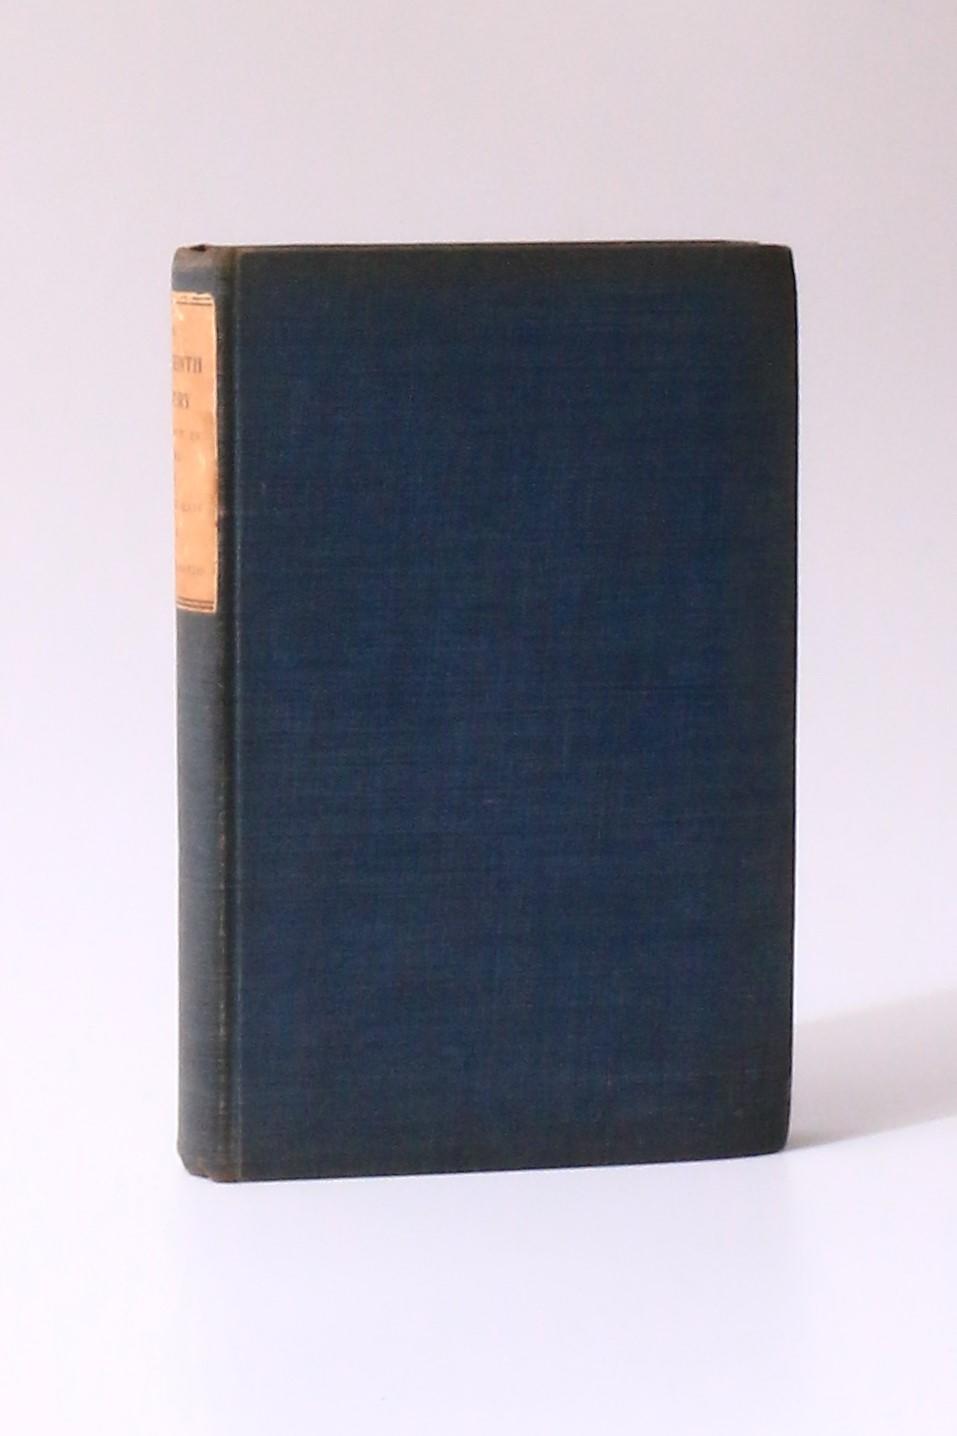 Havelock Ellis - The Nineteenth Century: A Dialogue in Utopia - Grant Richards, 1900, First Edition.